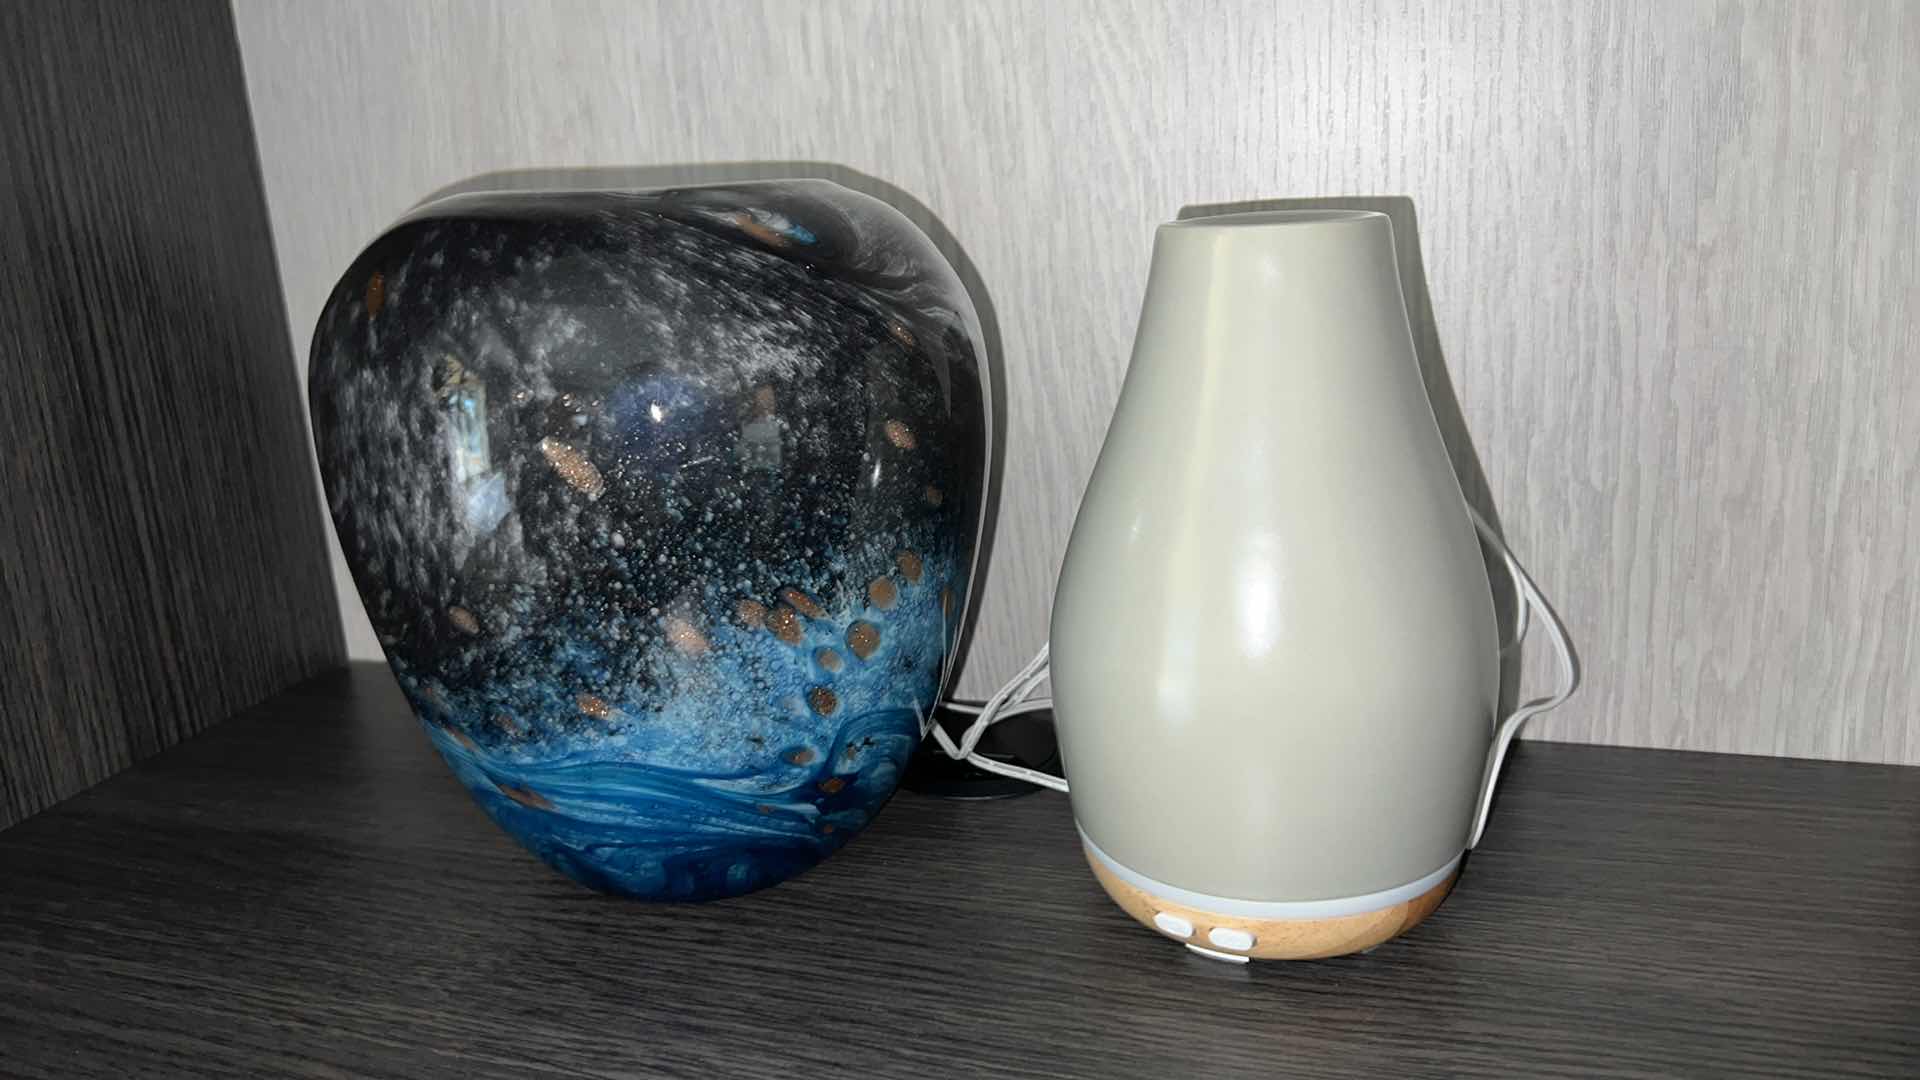 Photo 4 of AIR DIFFUSER & BLUE GLASS VASE